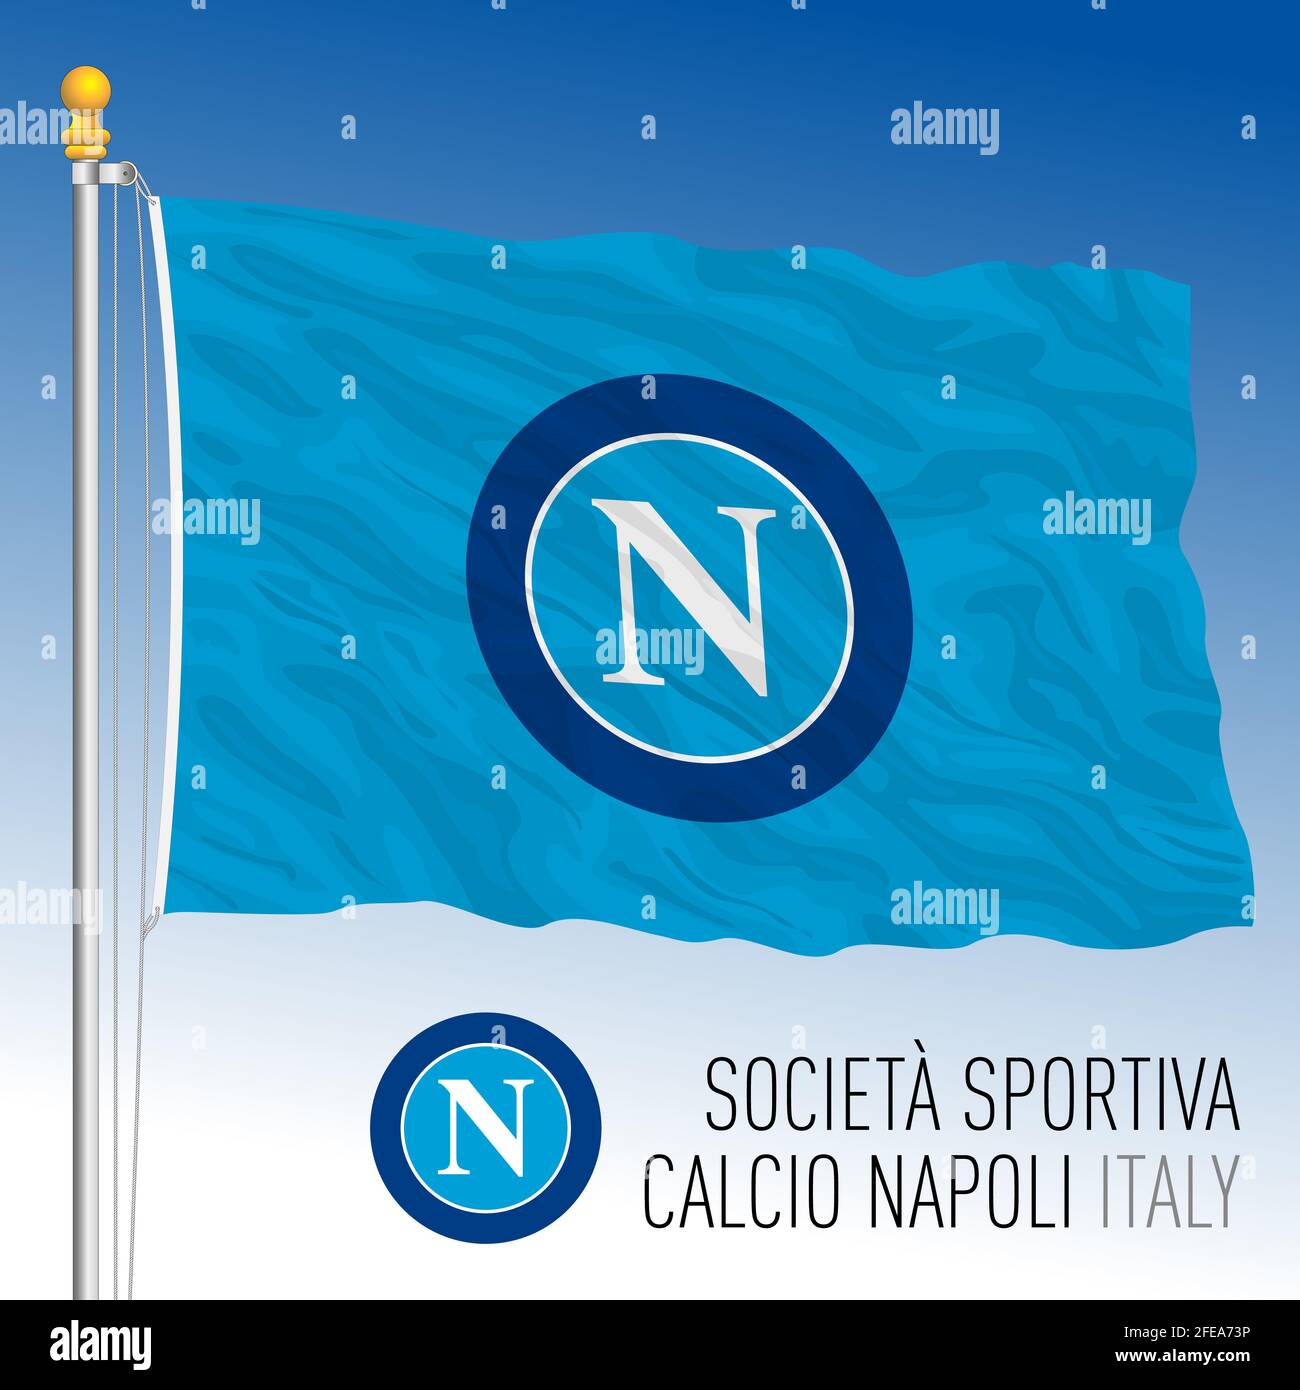 https://c8.alamy.com/comp/2FEA73P/italy-year-2021-football-championship-napoli-ssc-flag-and-team-crest-vector-illustration-2FEA73P.jpg